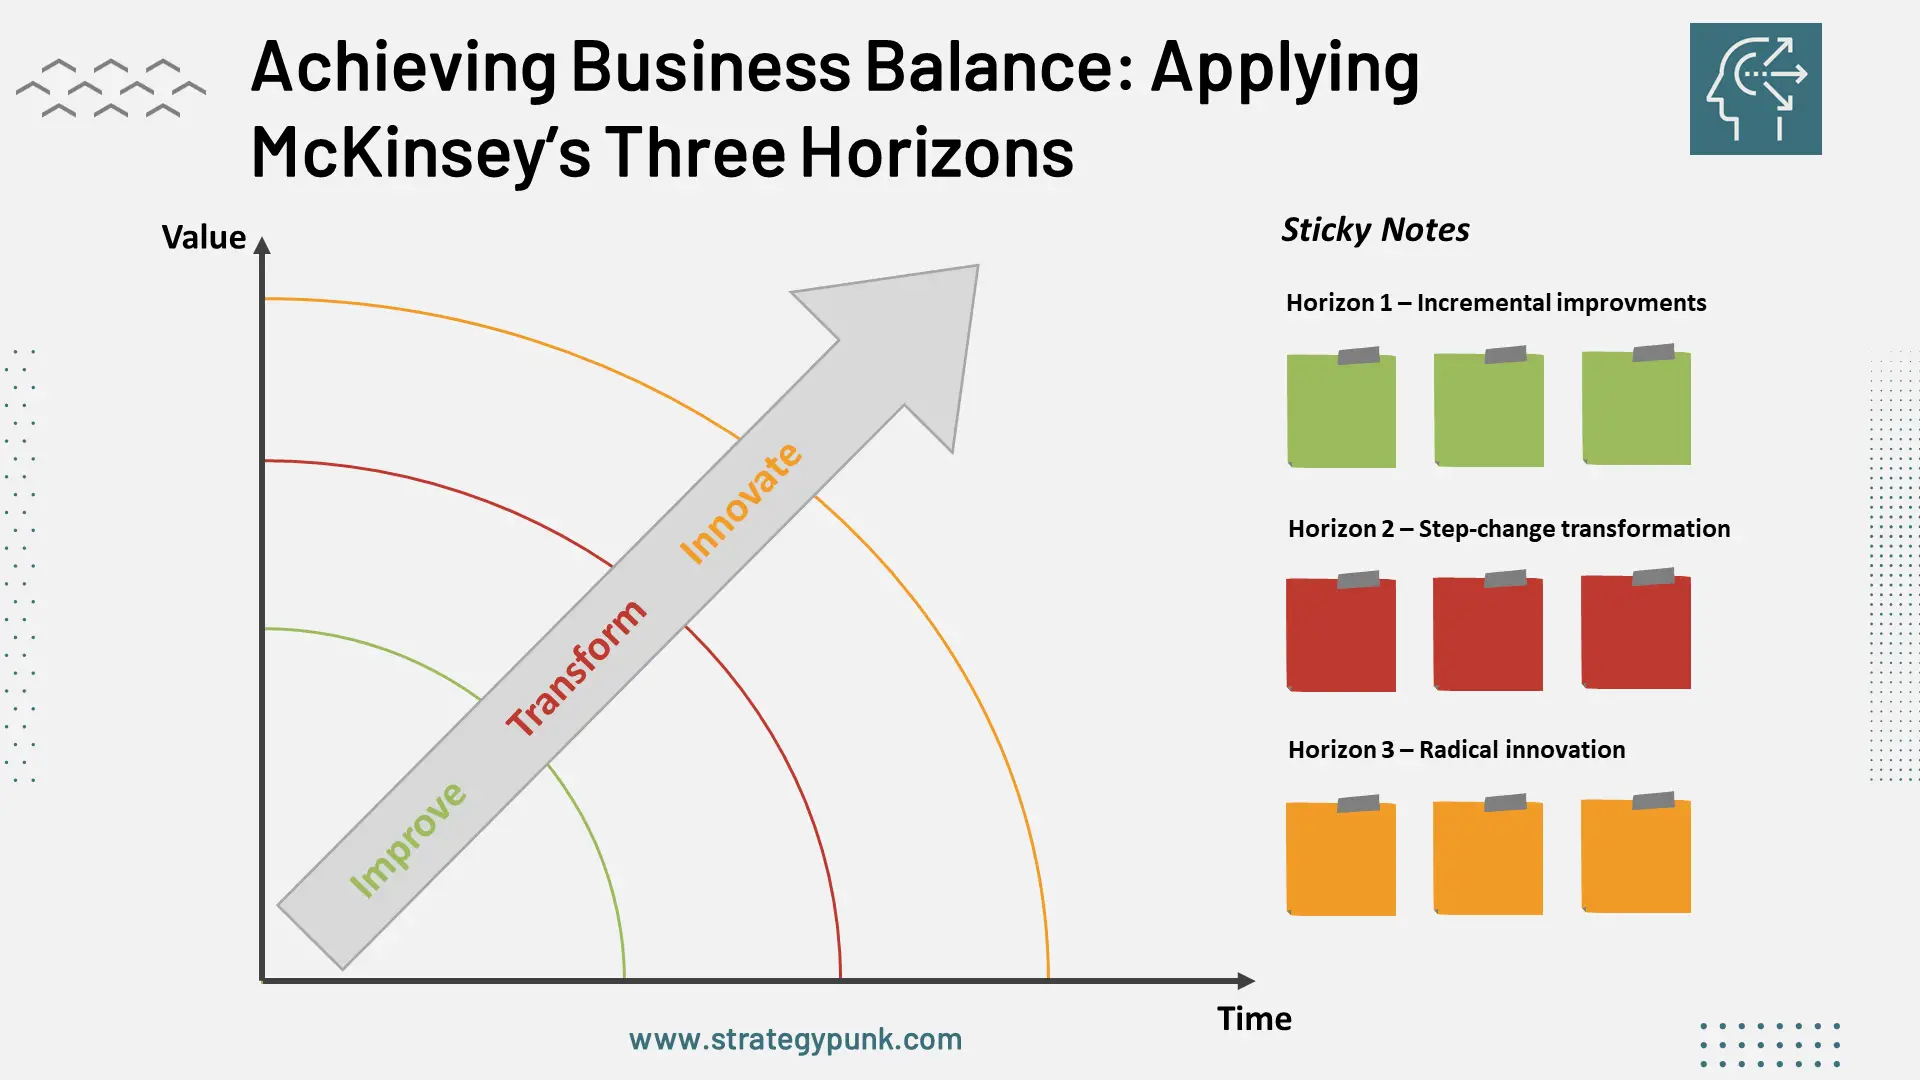 Achieving Balanced Business Growth: A Workshop Template on McKinsey's Three Horizons